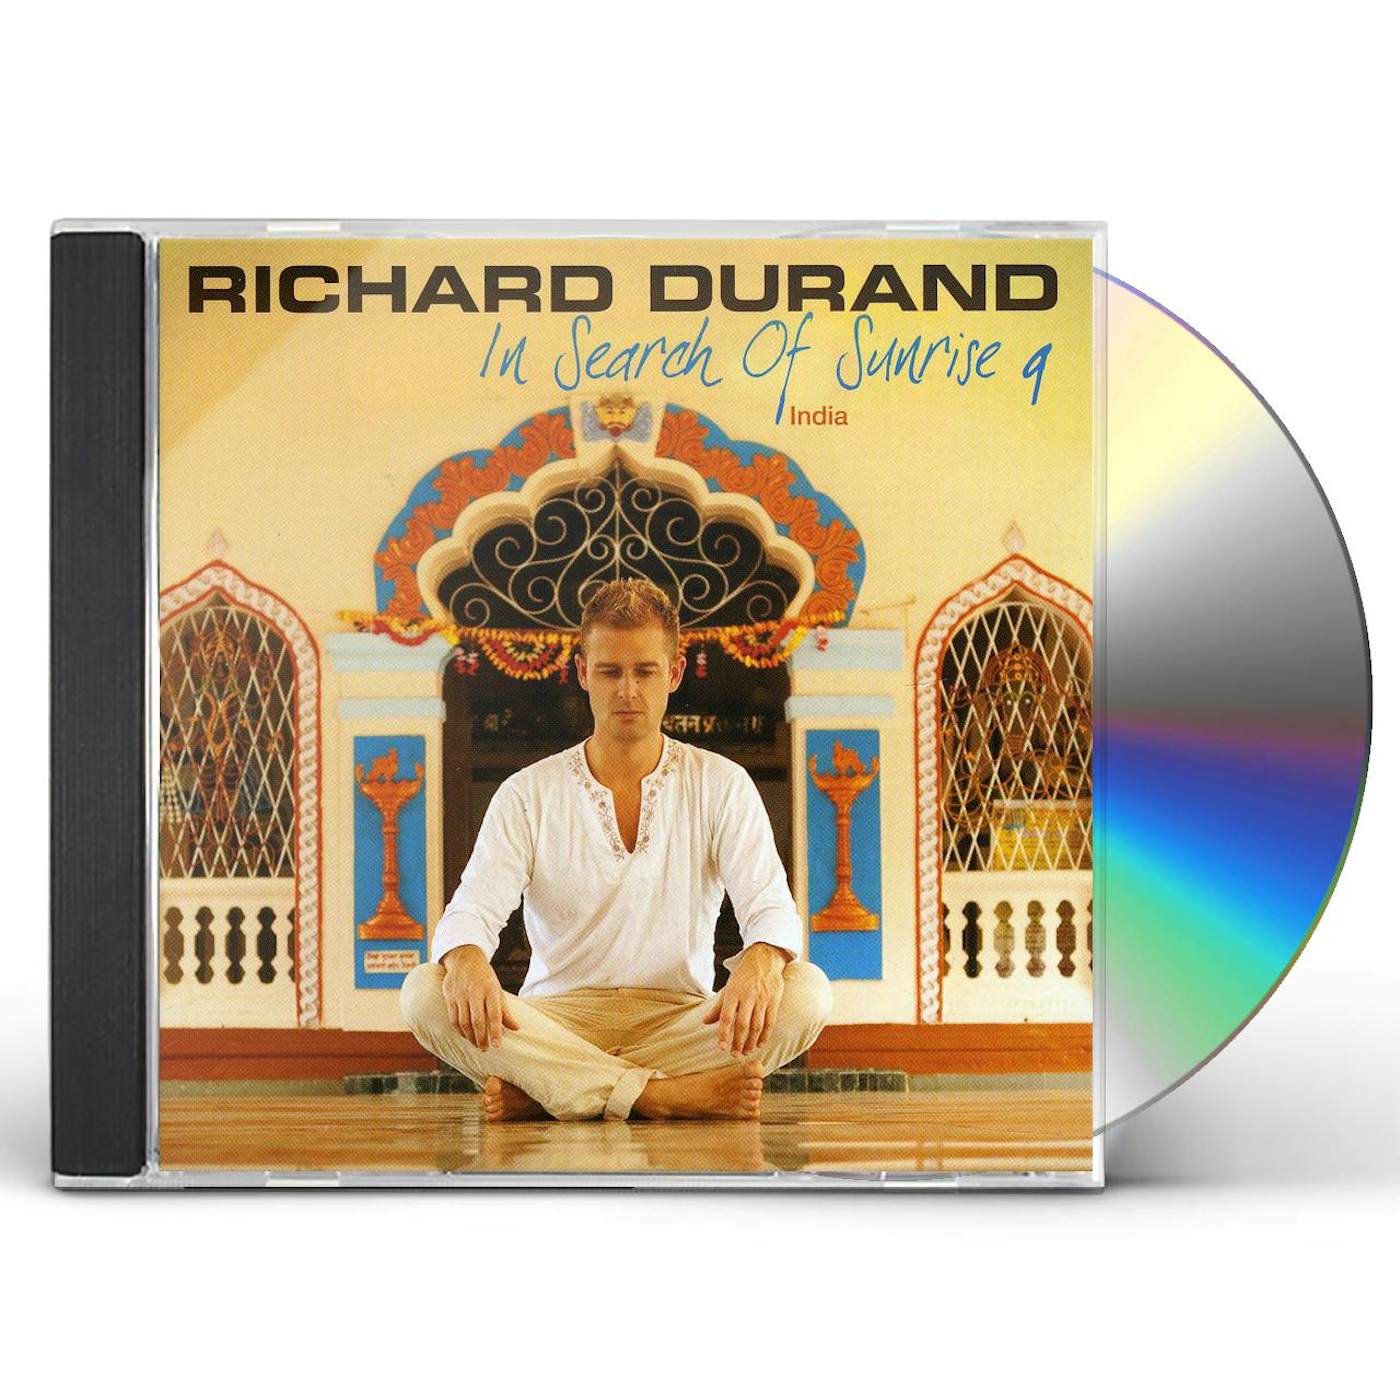 Richard Durand IN SEARCH OF SUNRISE 9 INDIA CD